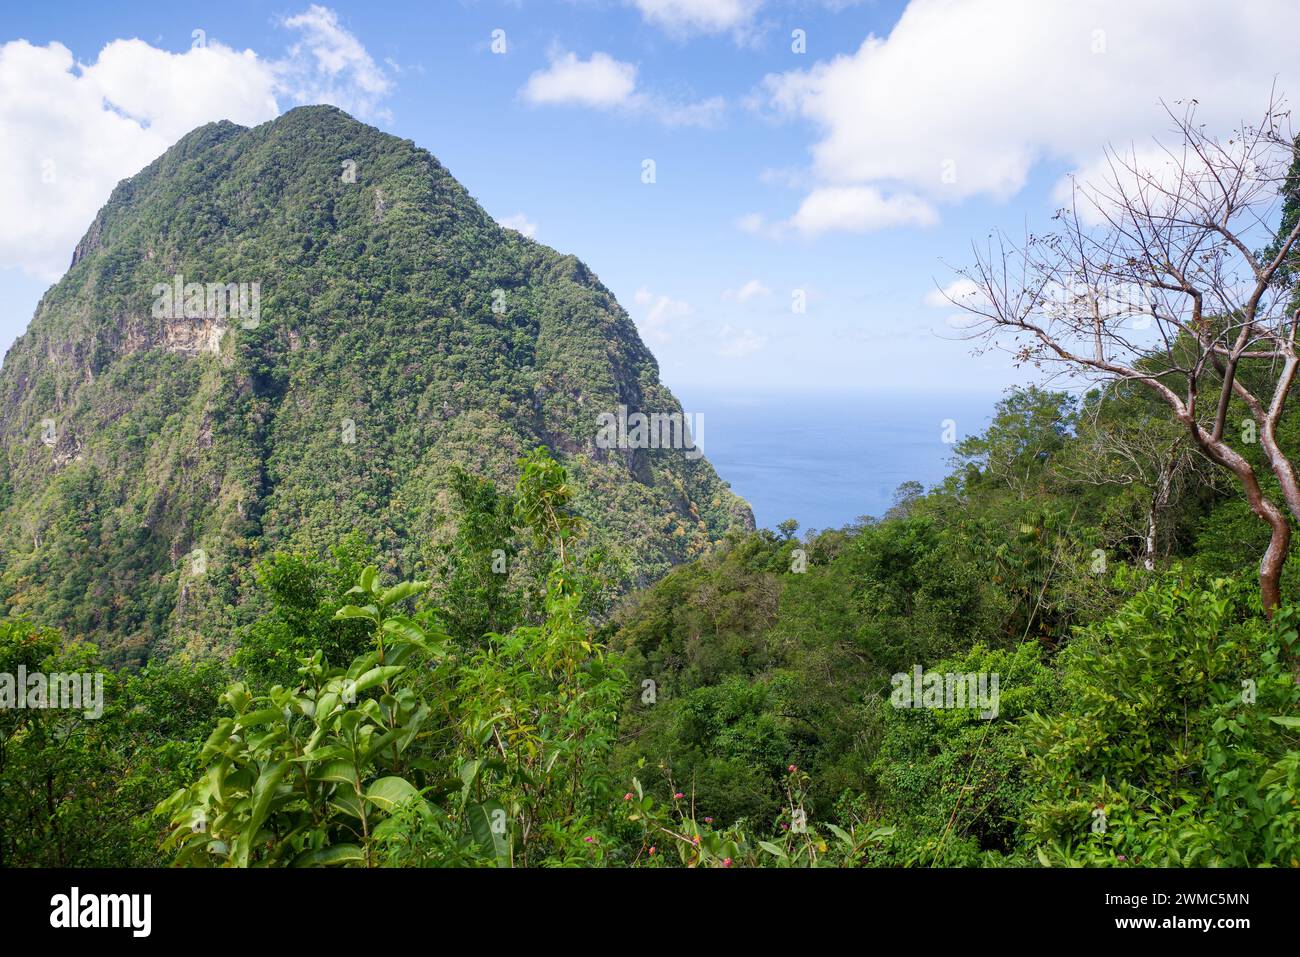 The iconic Gros Piton seen from Tet Paul nature trail - Saint Lucia, West Indies Stock Photo